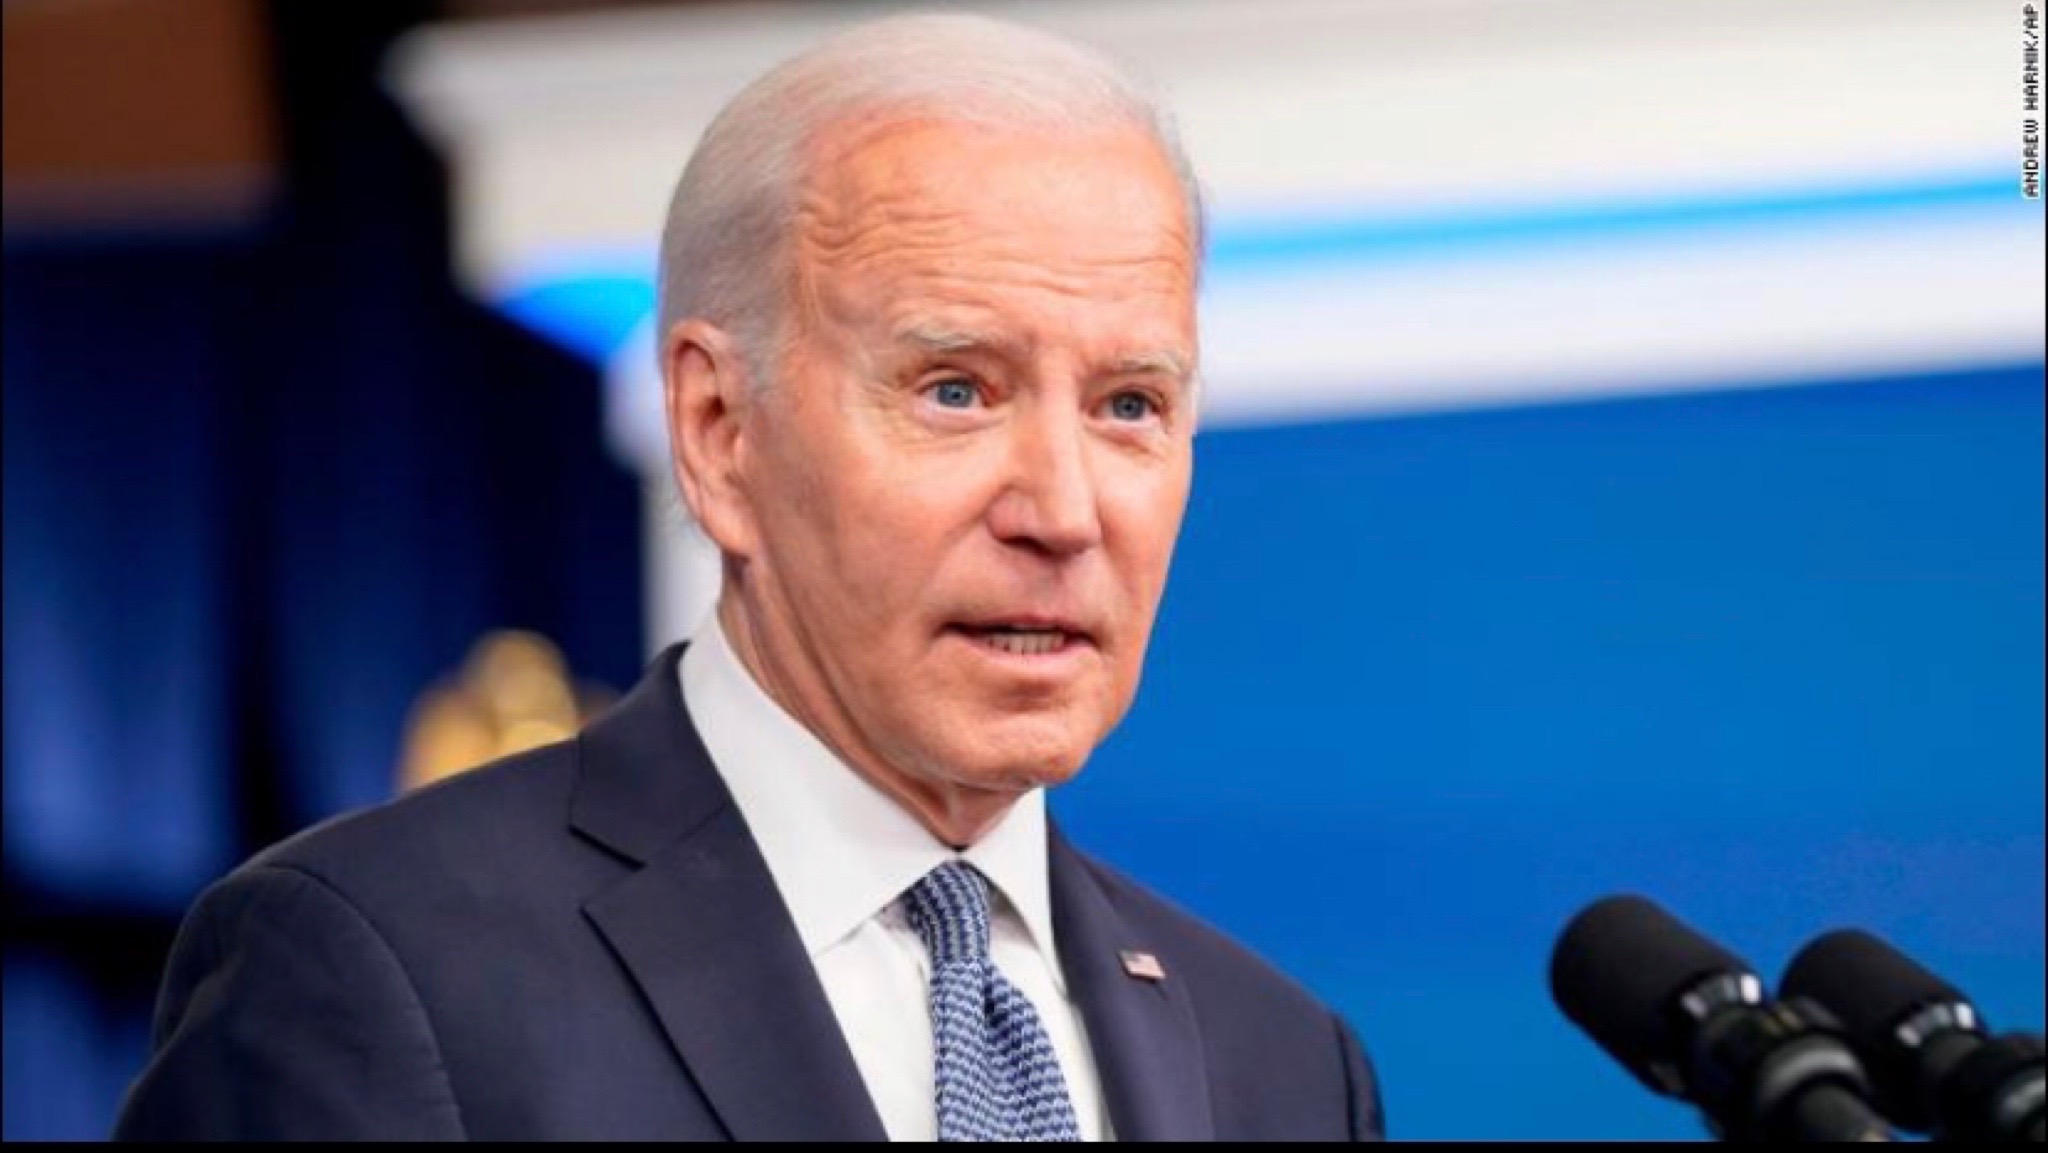 Classified documents, Biden, private office. Wilmington, Federal search